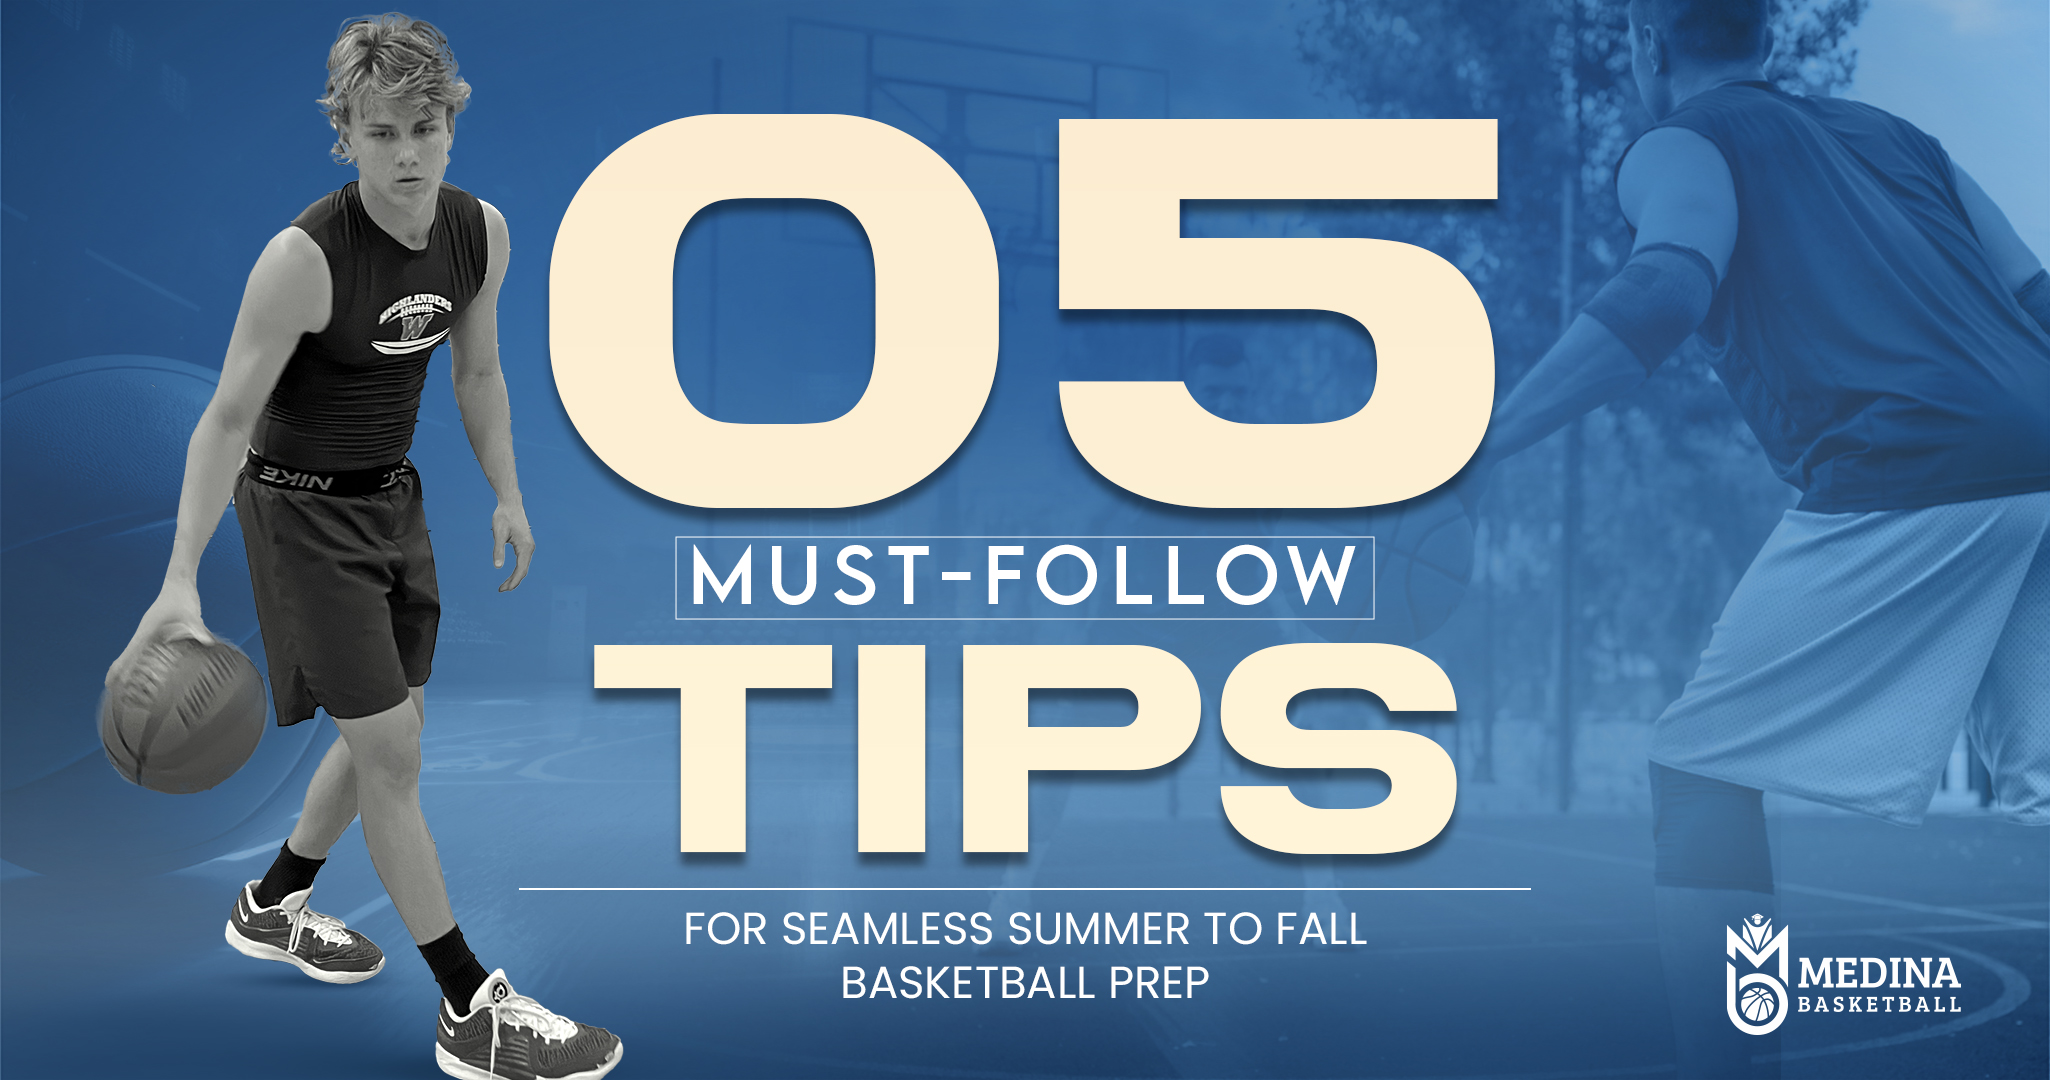 5 Must-Follow Tips for Seamless Summer to Fall Basketball Prep